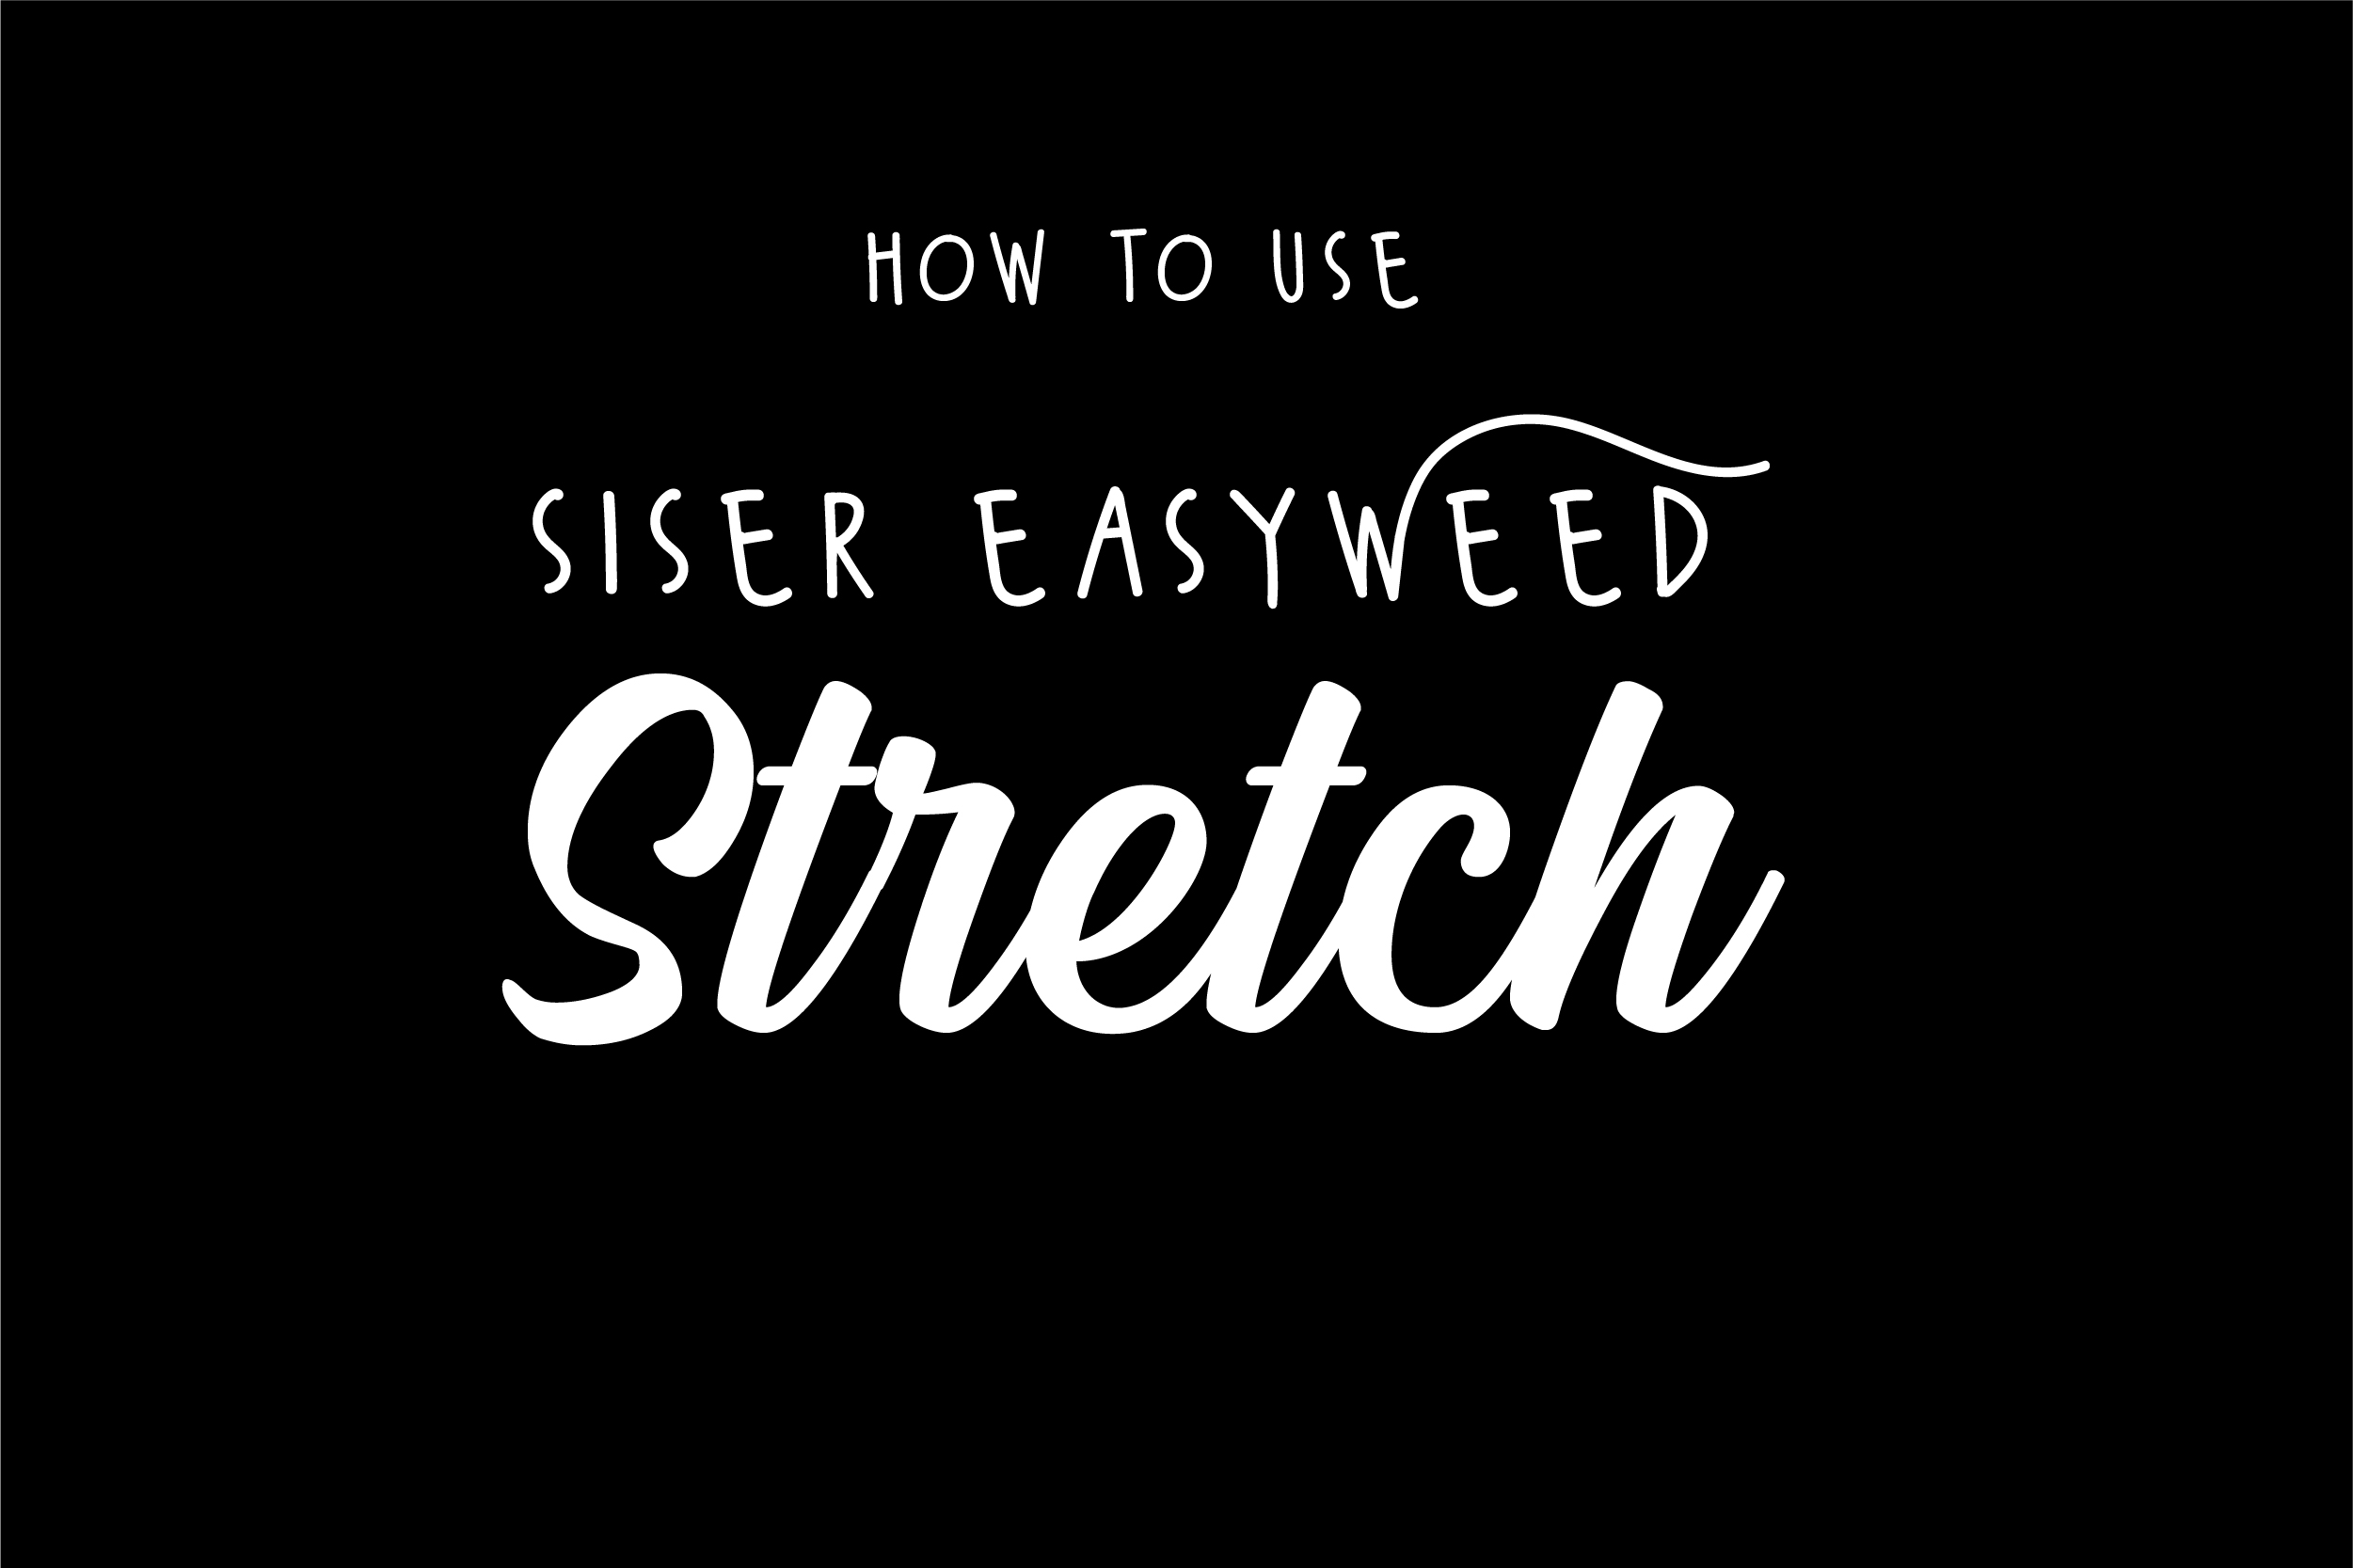 Siser EasyWeed EcoStretch HTV